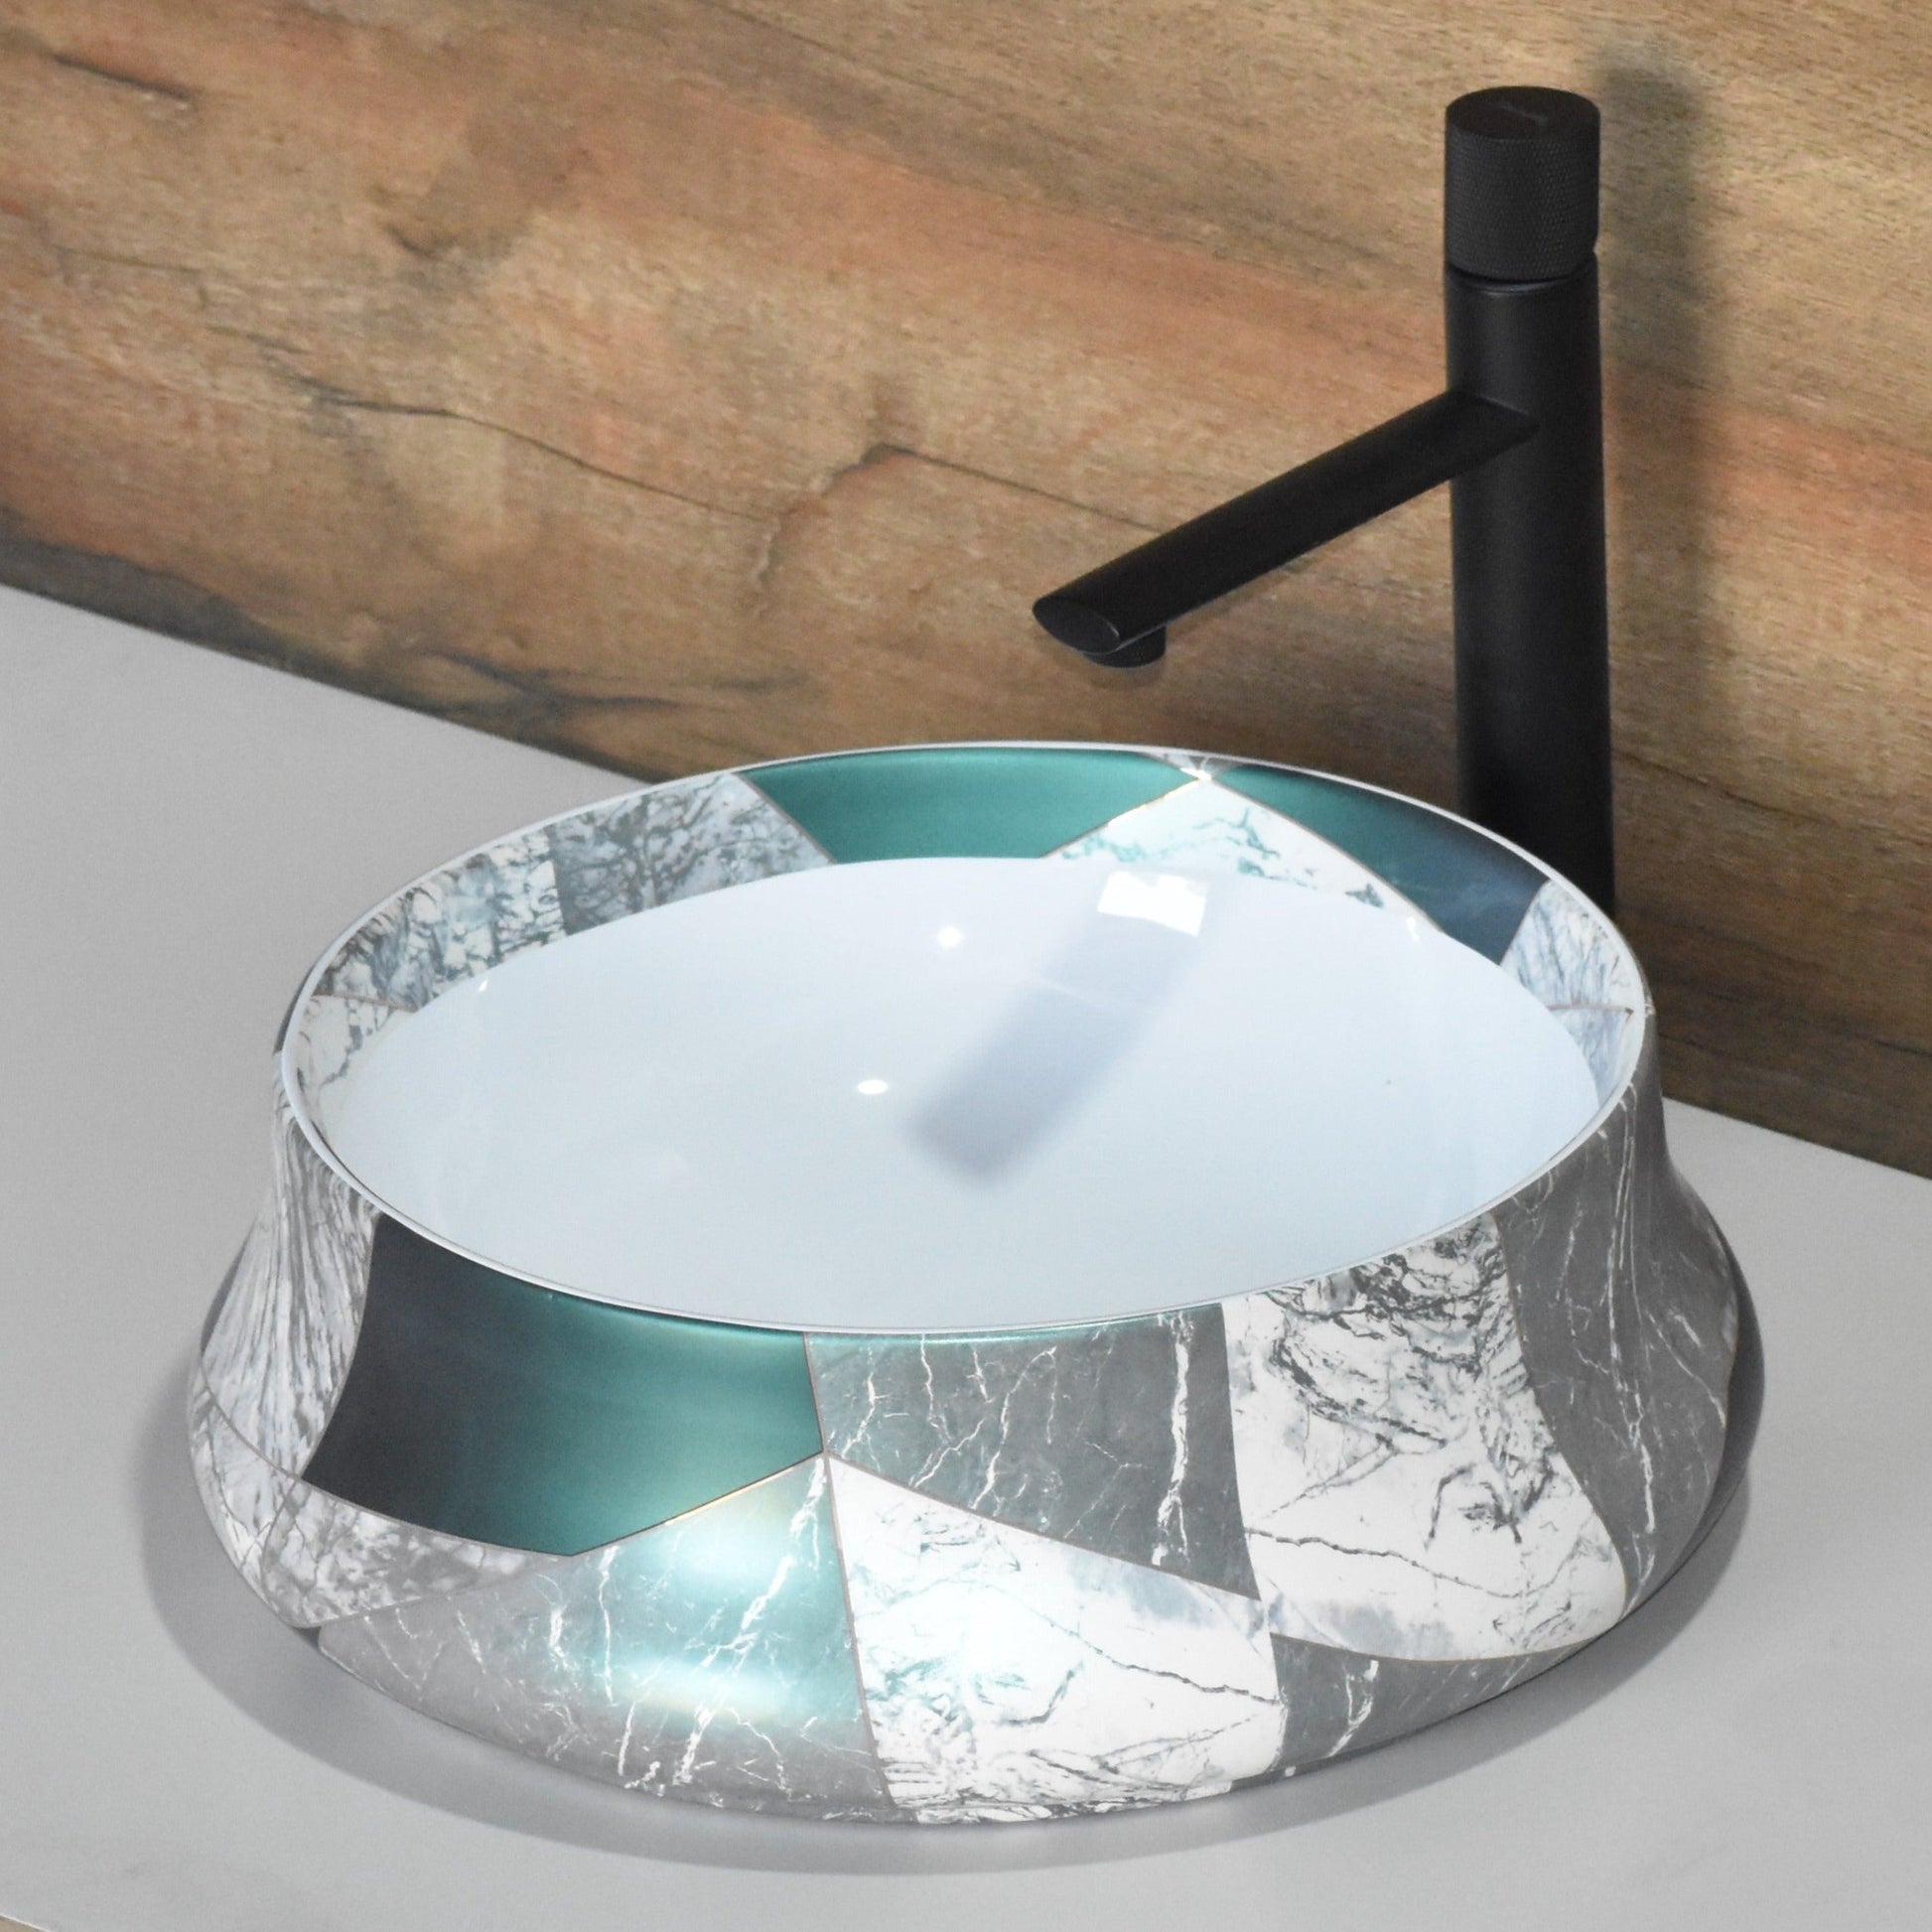 inart green color wash basin round shape table top